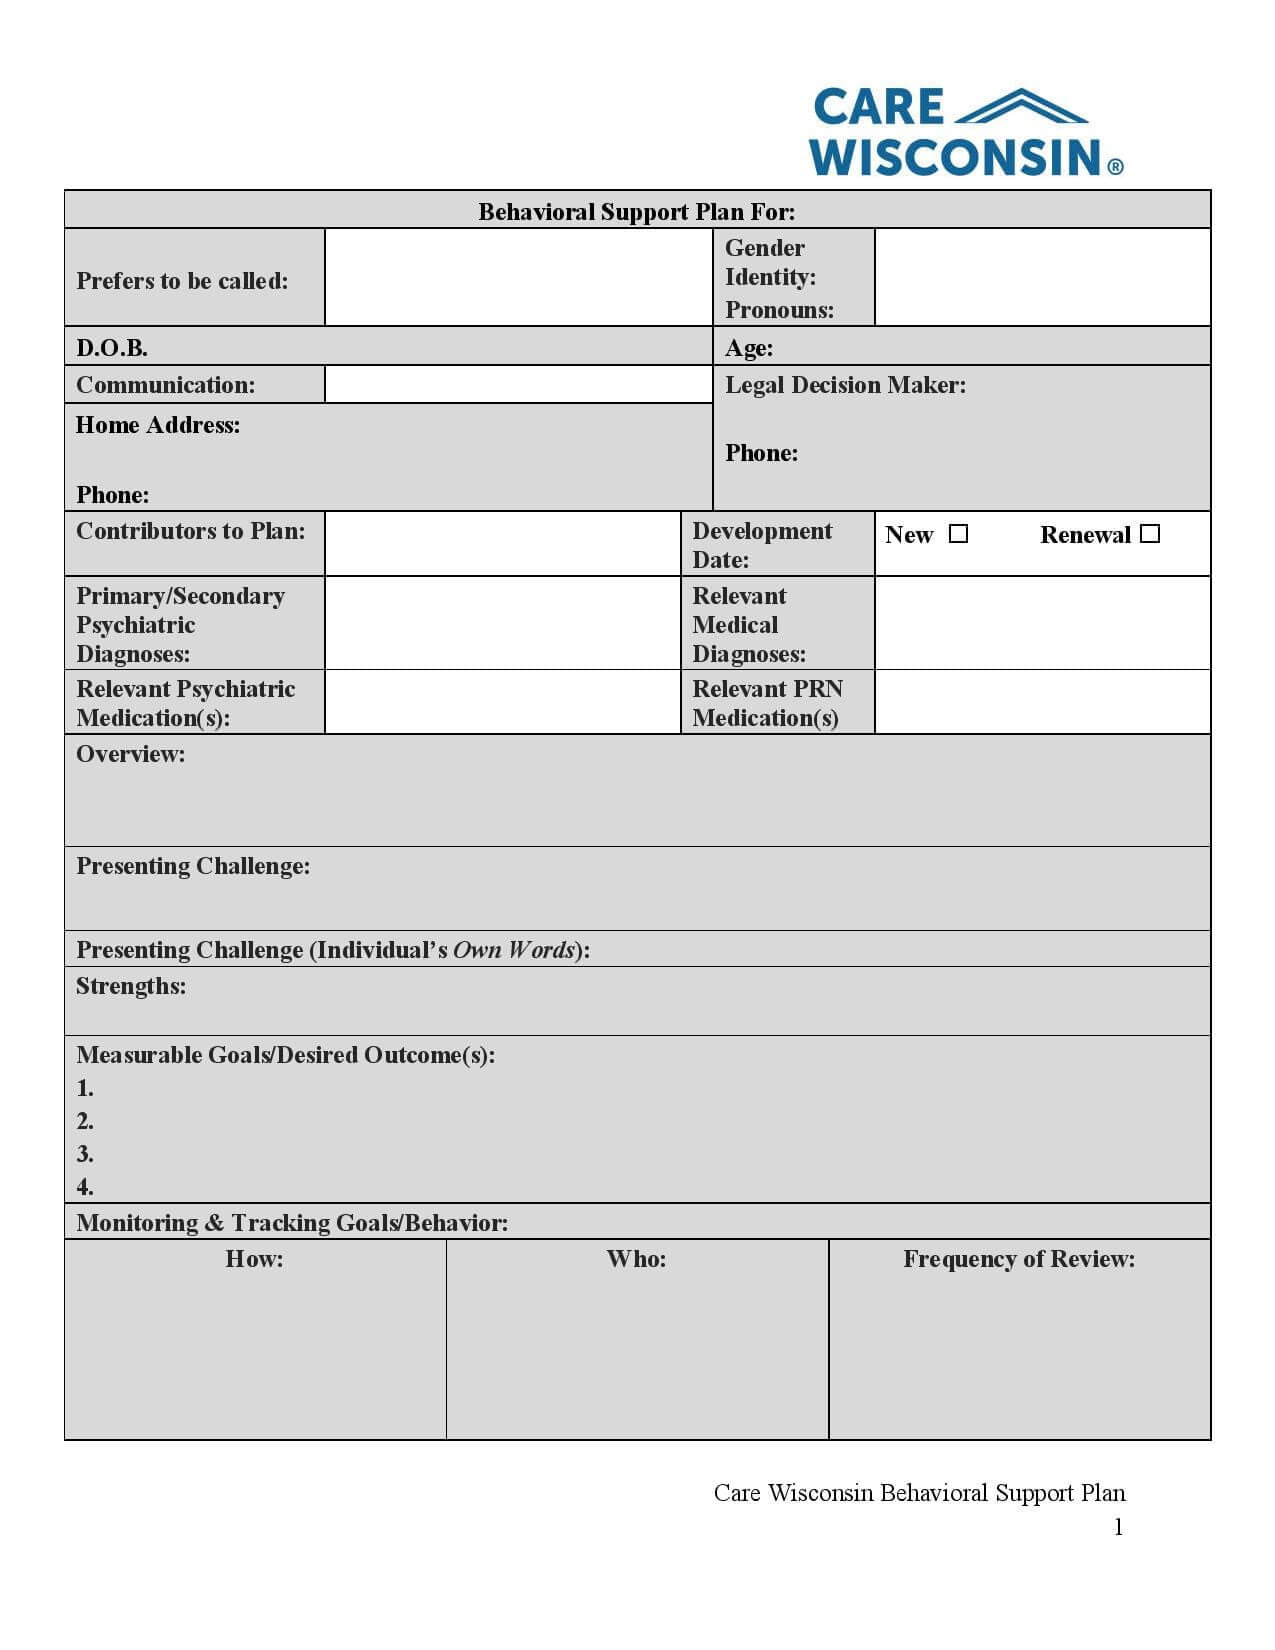 Behavioral Support Plan Template Page 001 - Care Wisconsin Throughout Behavior Support Plan Template